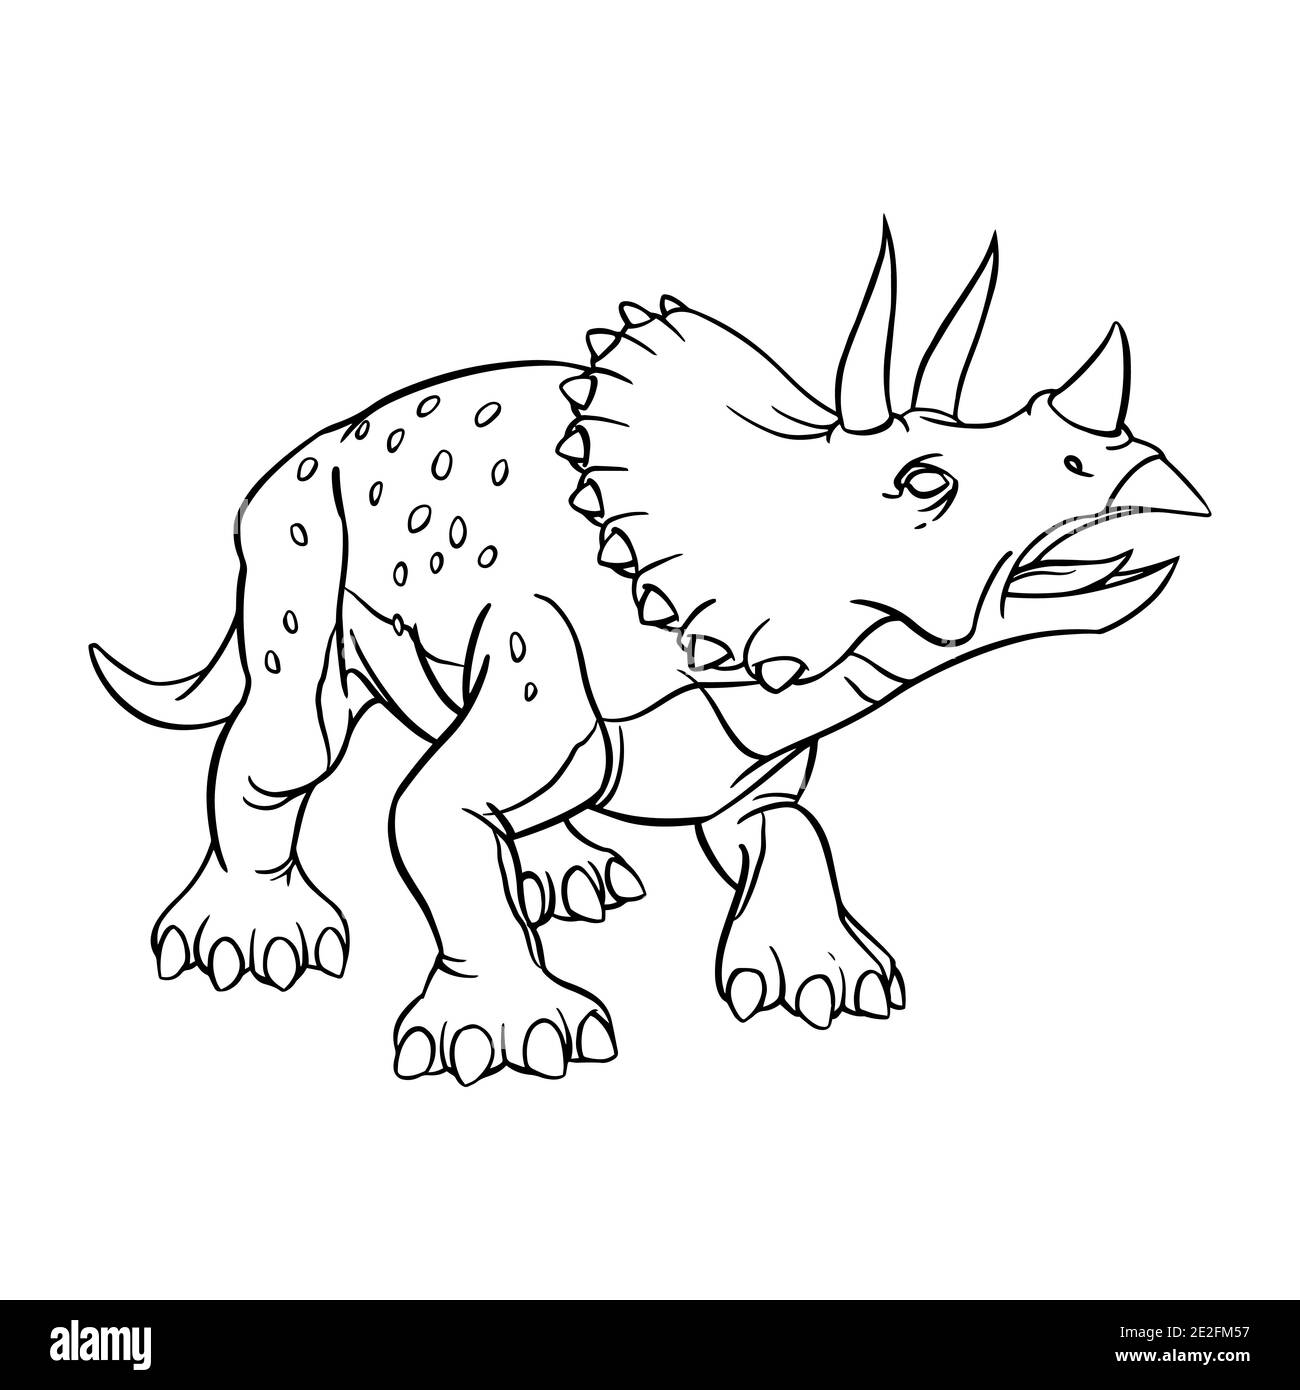 Triceratops dinosaur cartoon linear sketch for coloring book isolated on white background. Vector illustration Stock Vector